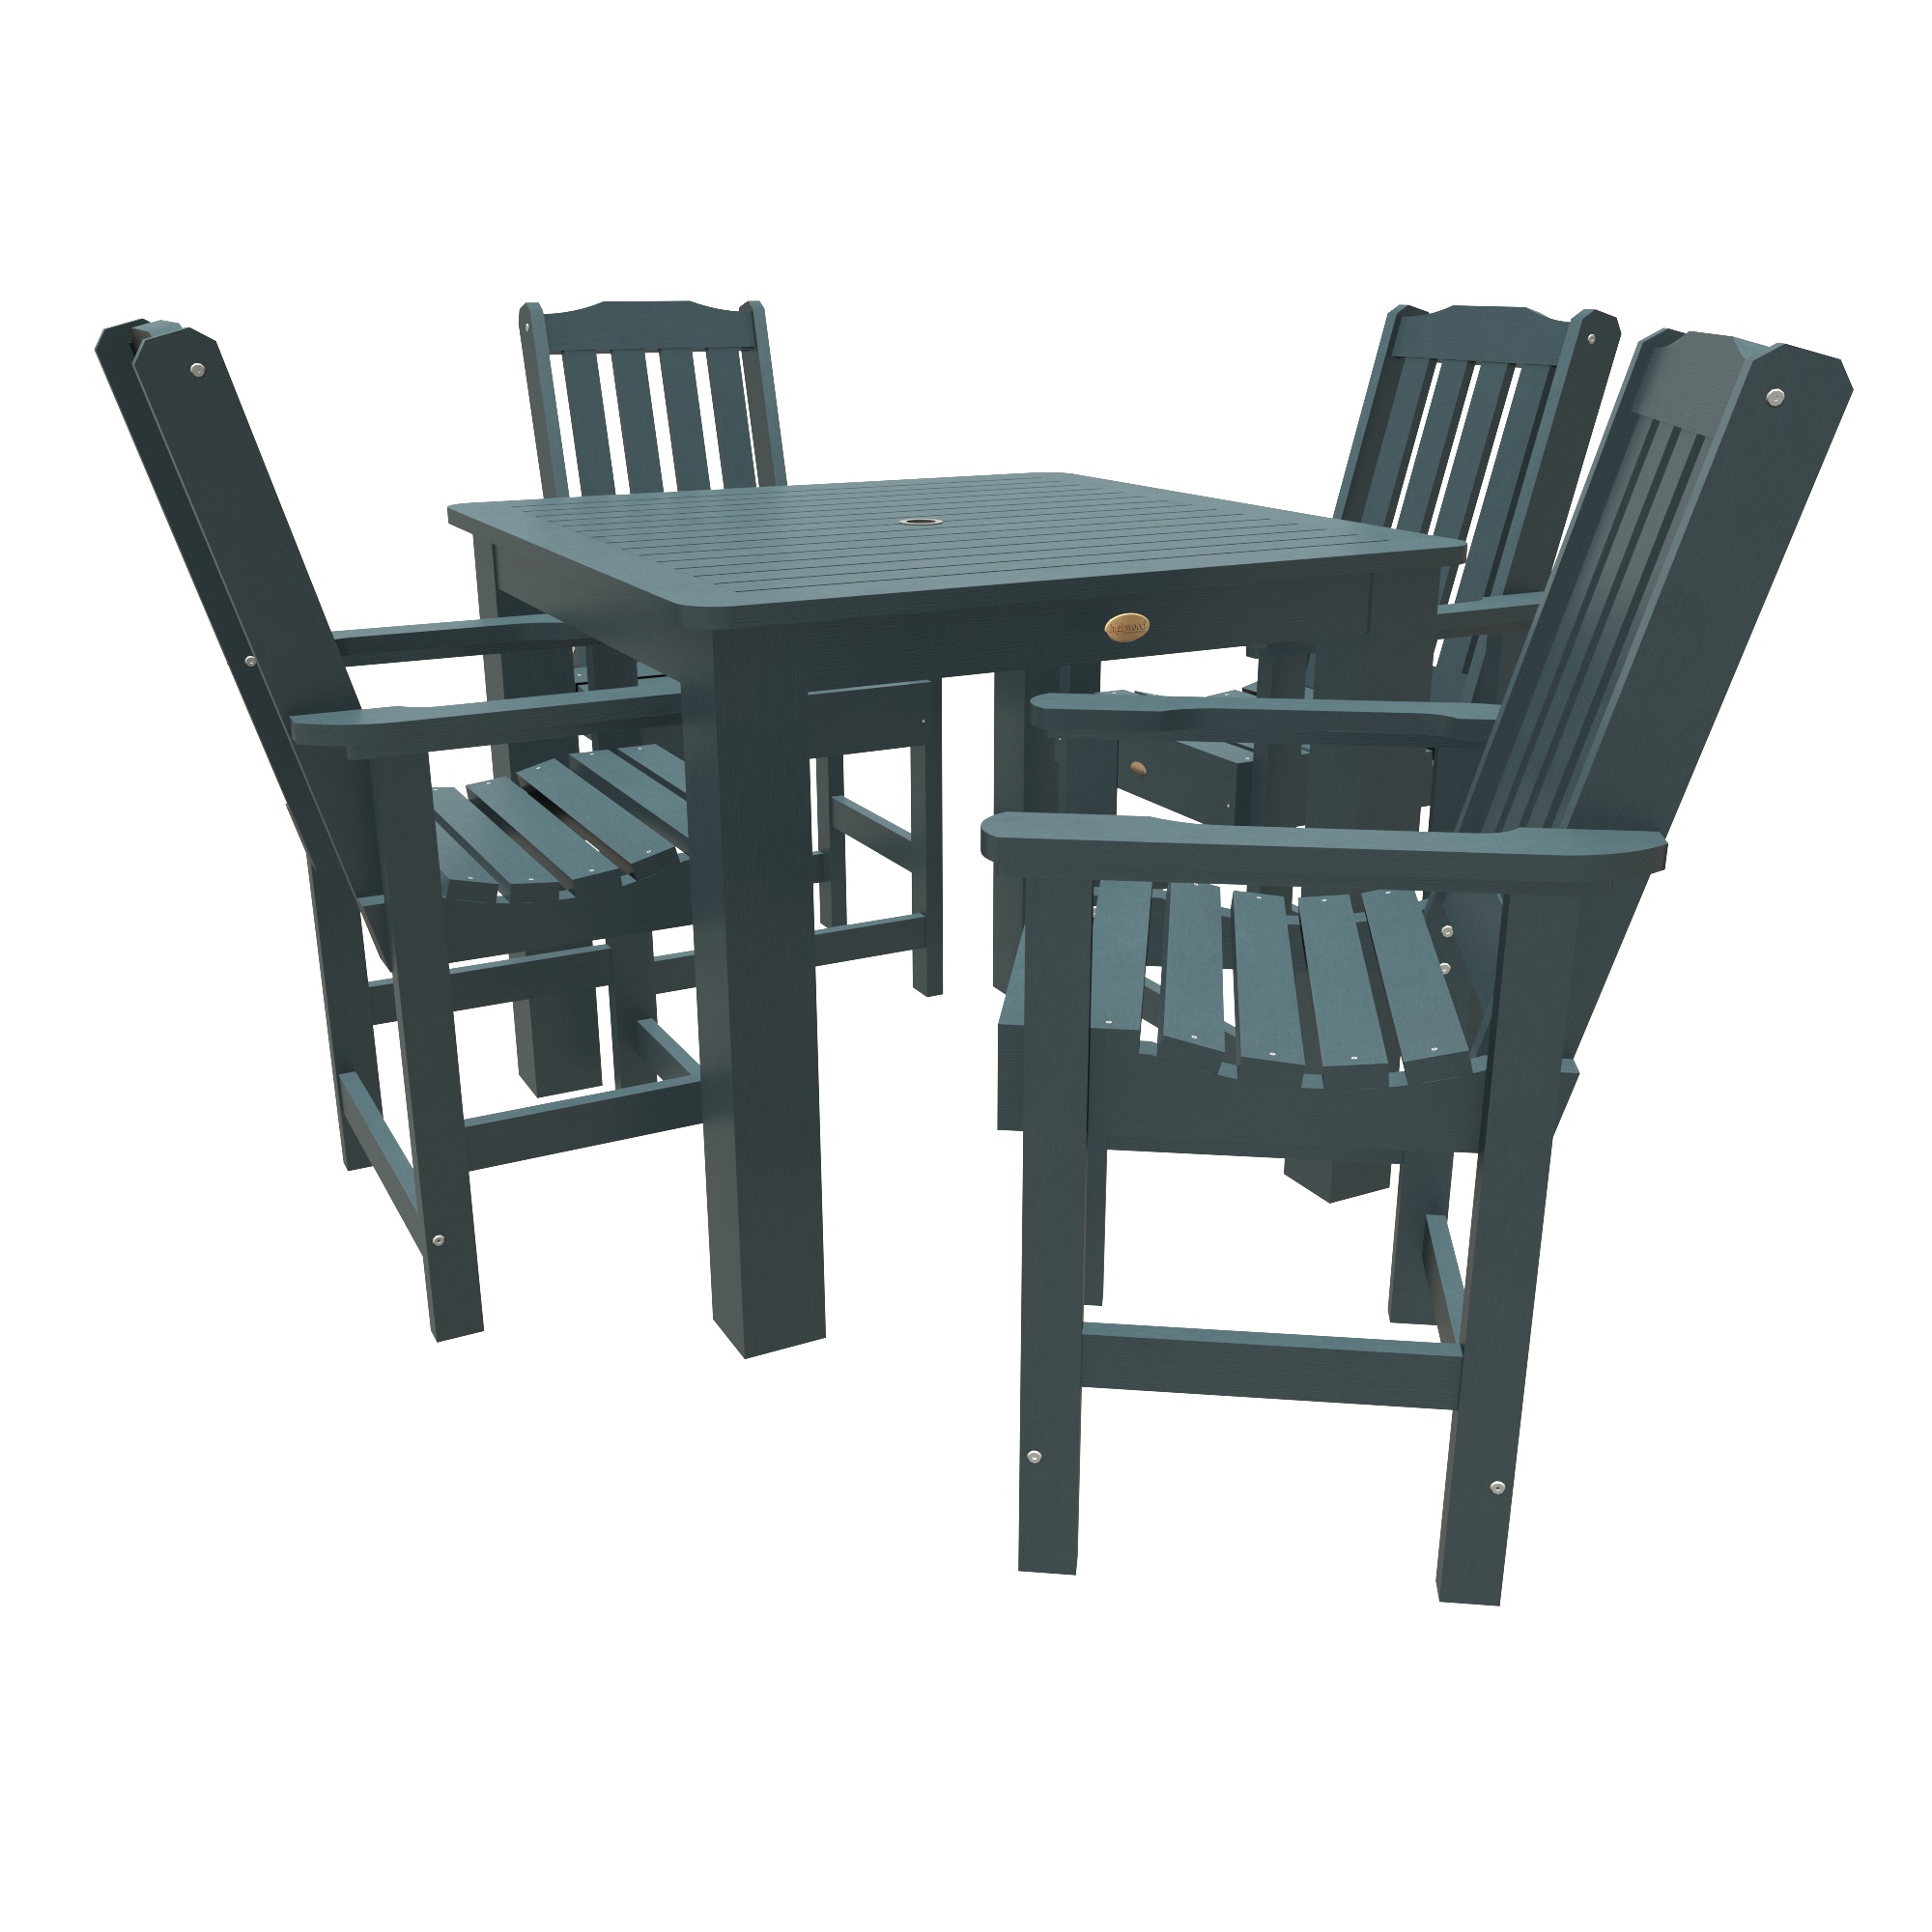 Highwood 5pc Lehigh Square Dining Set - Counter Height - image 1 of 8